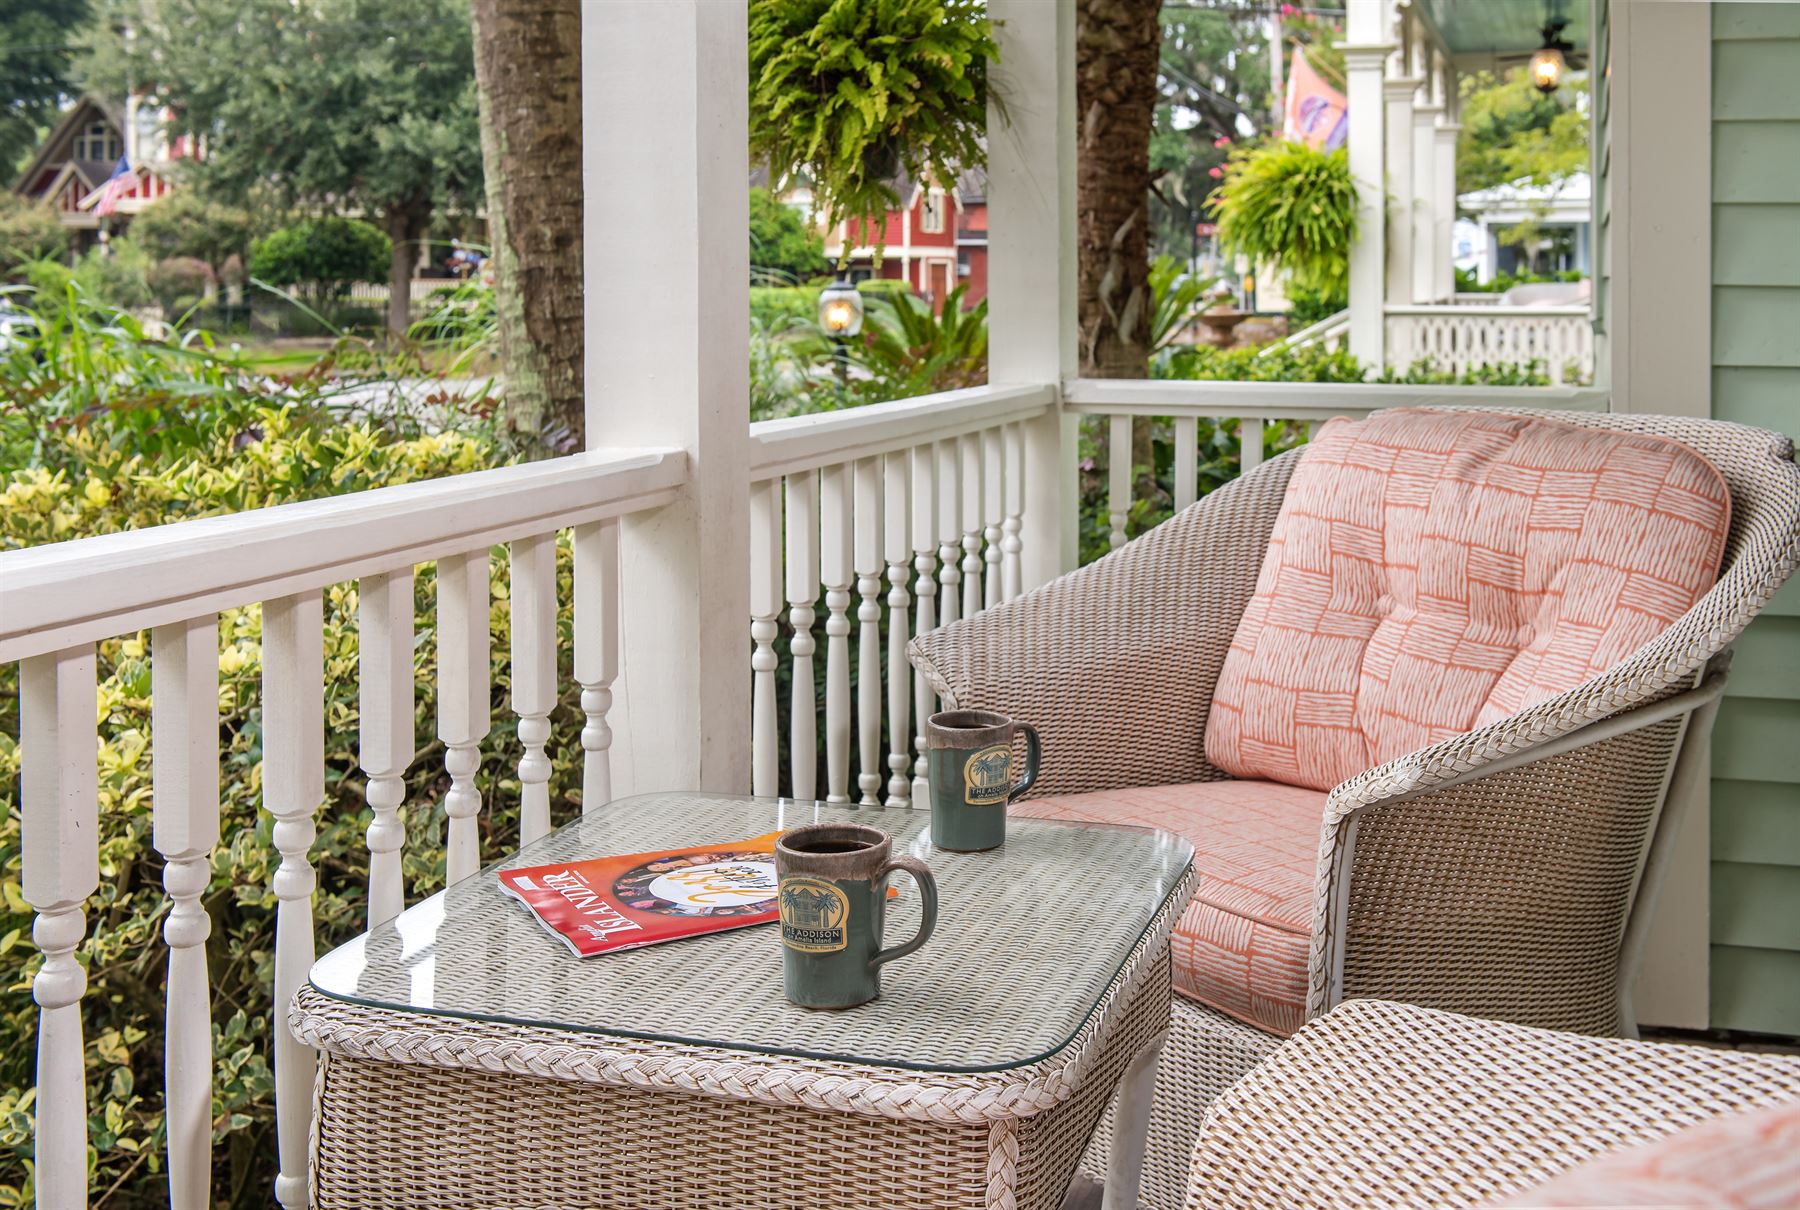 Room 8 at The Addison on Amelia Island - seating area out on the porch